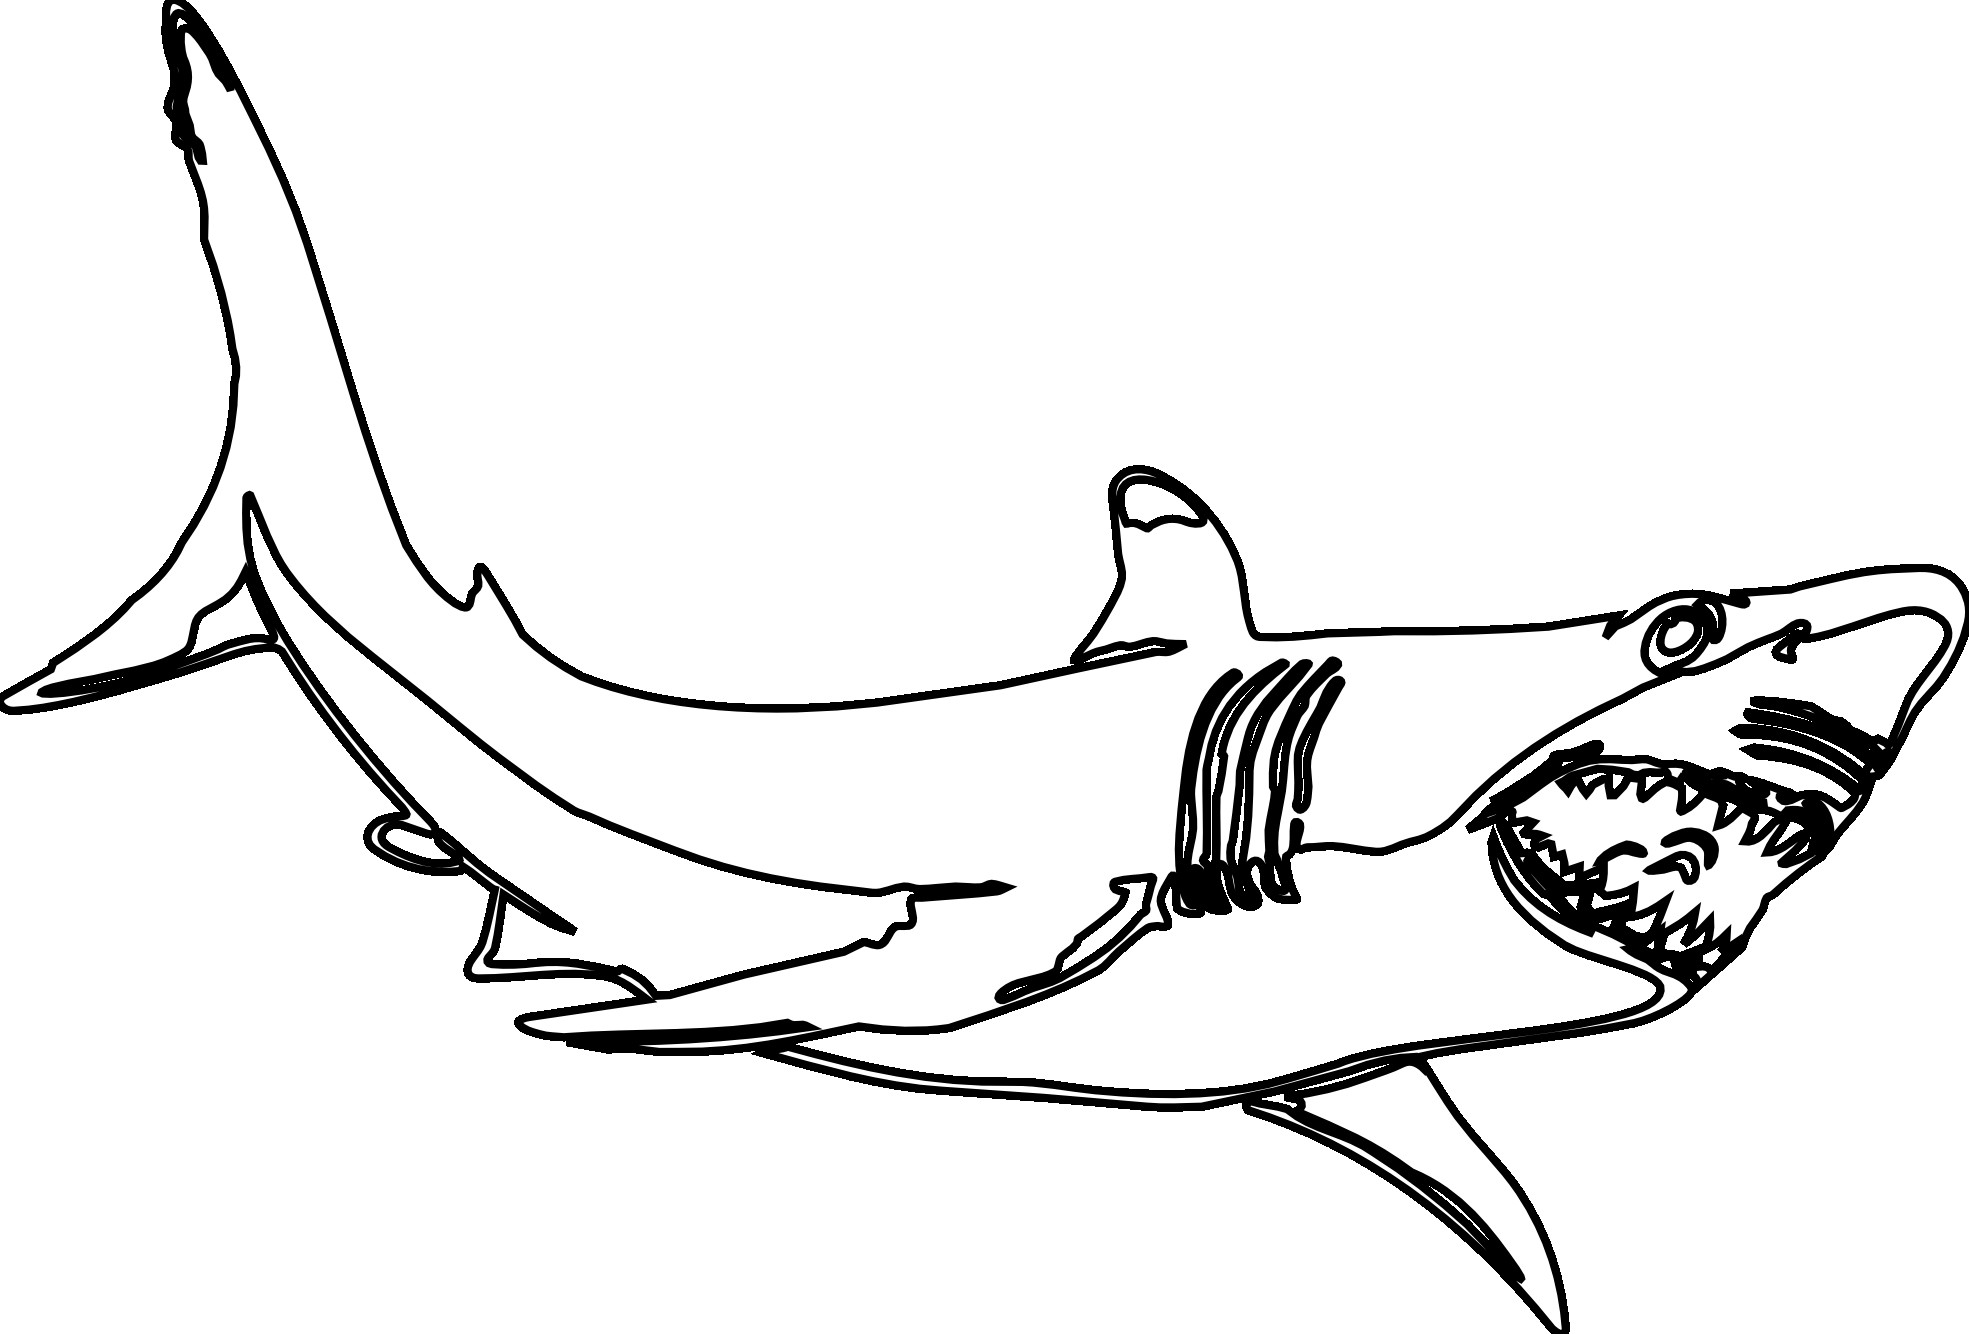 Coloring Pages : Jaws Shark Coloring Pages Free Printable For Kids Baby 49  Extraordinary Jaws Coloring Pages Photo Inspirations ~ Ny19 Votes